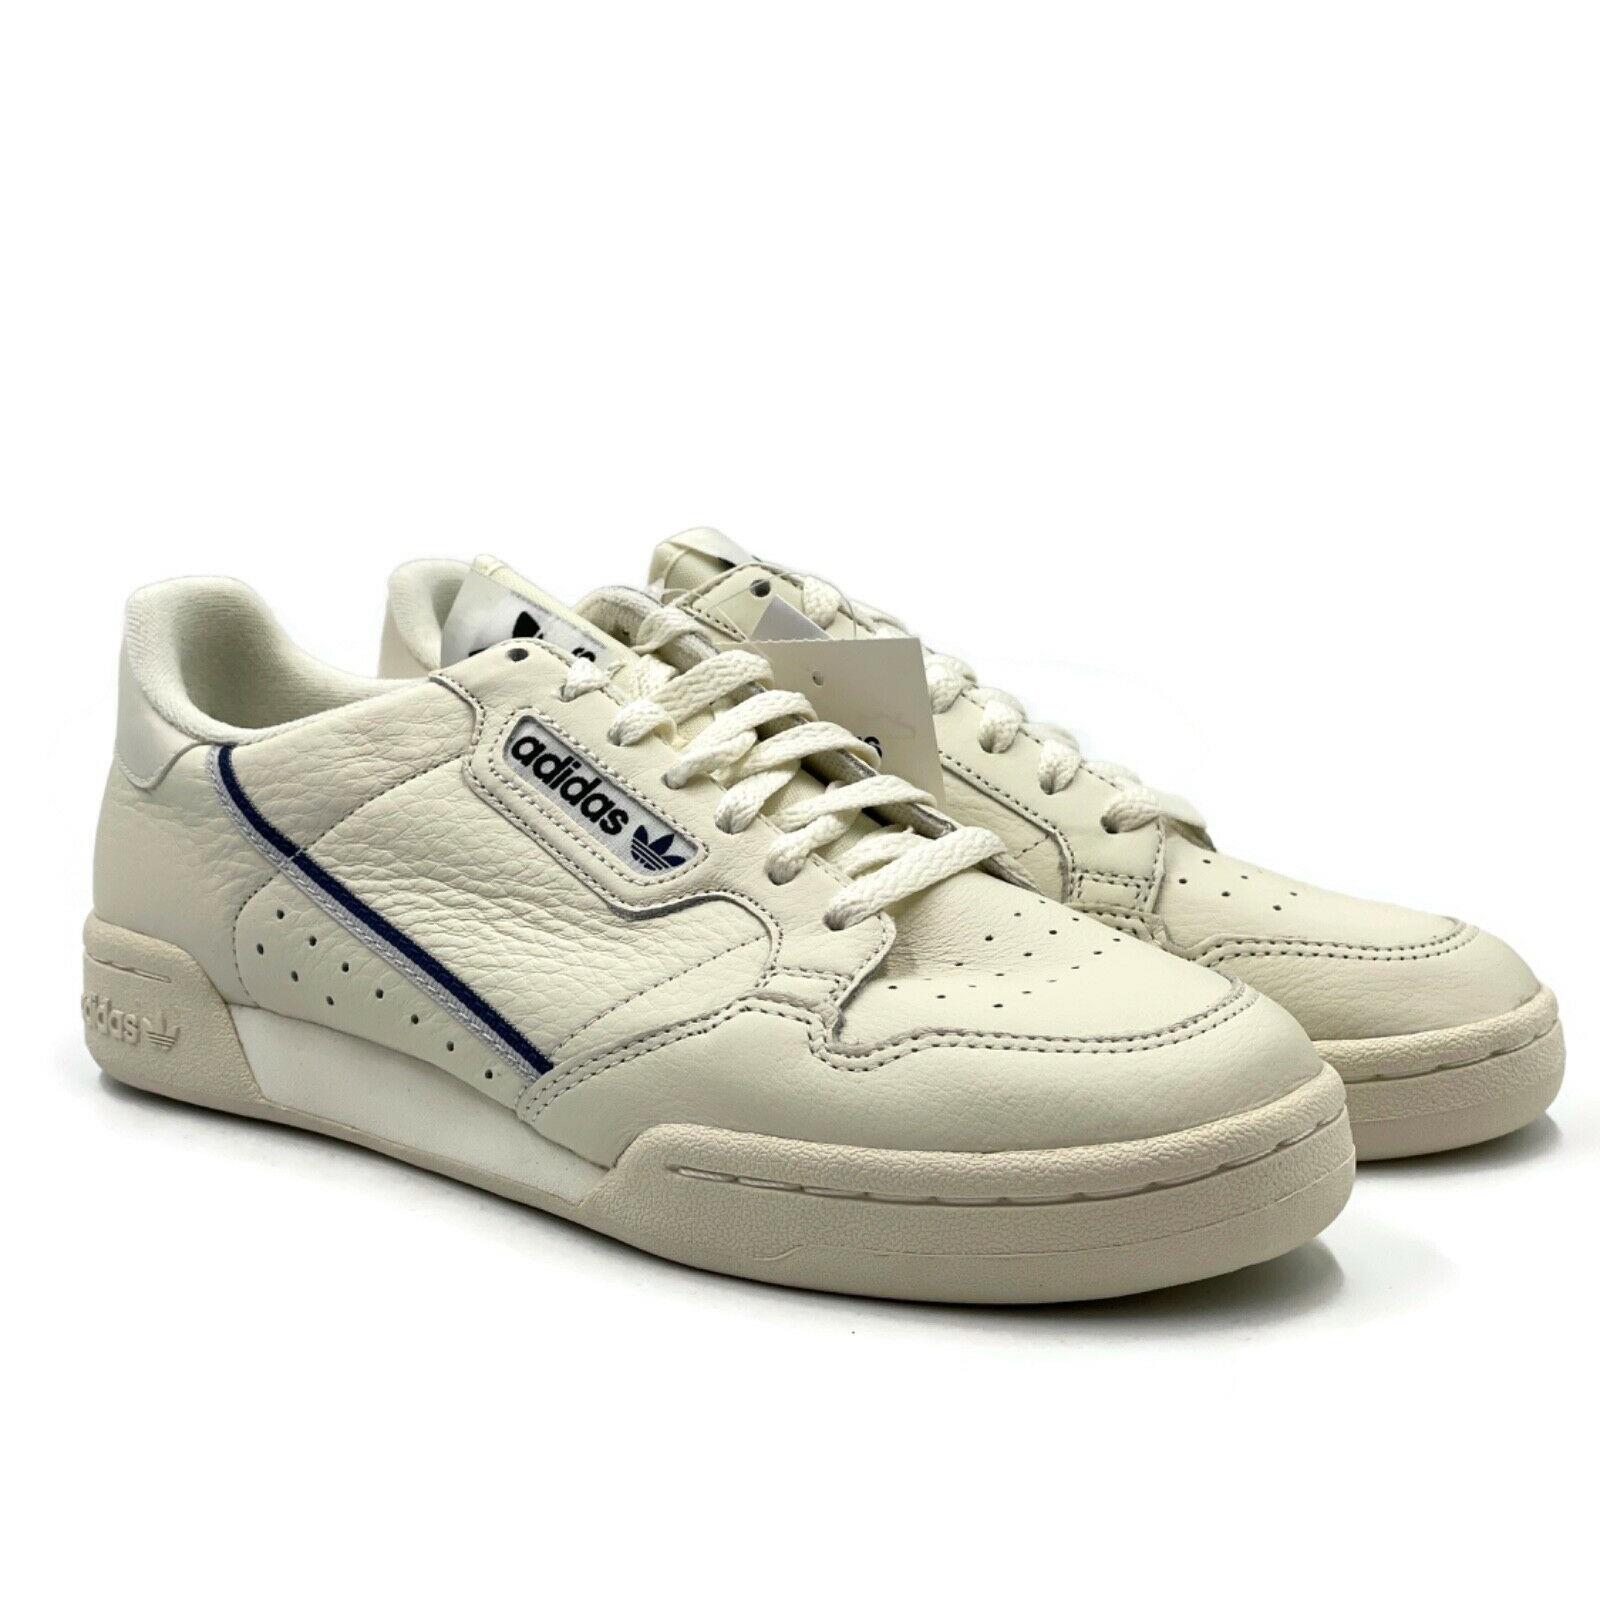 Adidas shoes Continental - Ivory White Blue 3